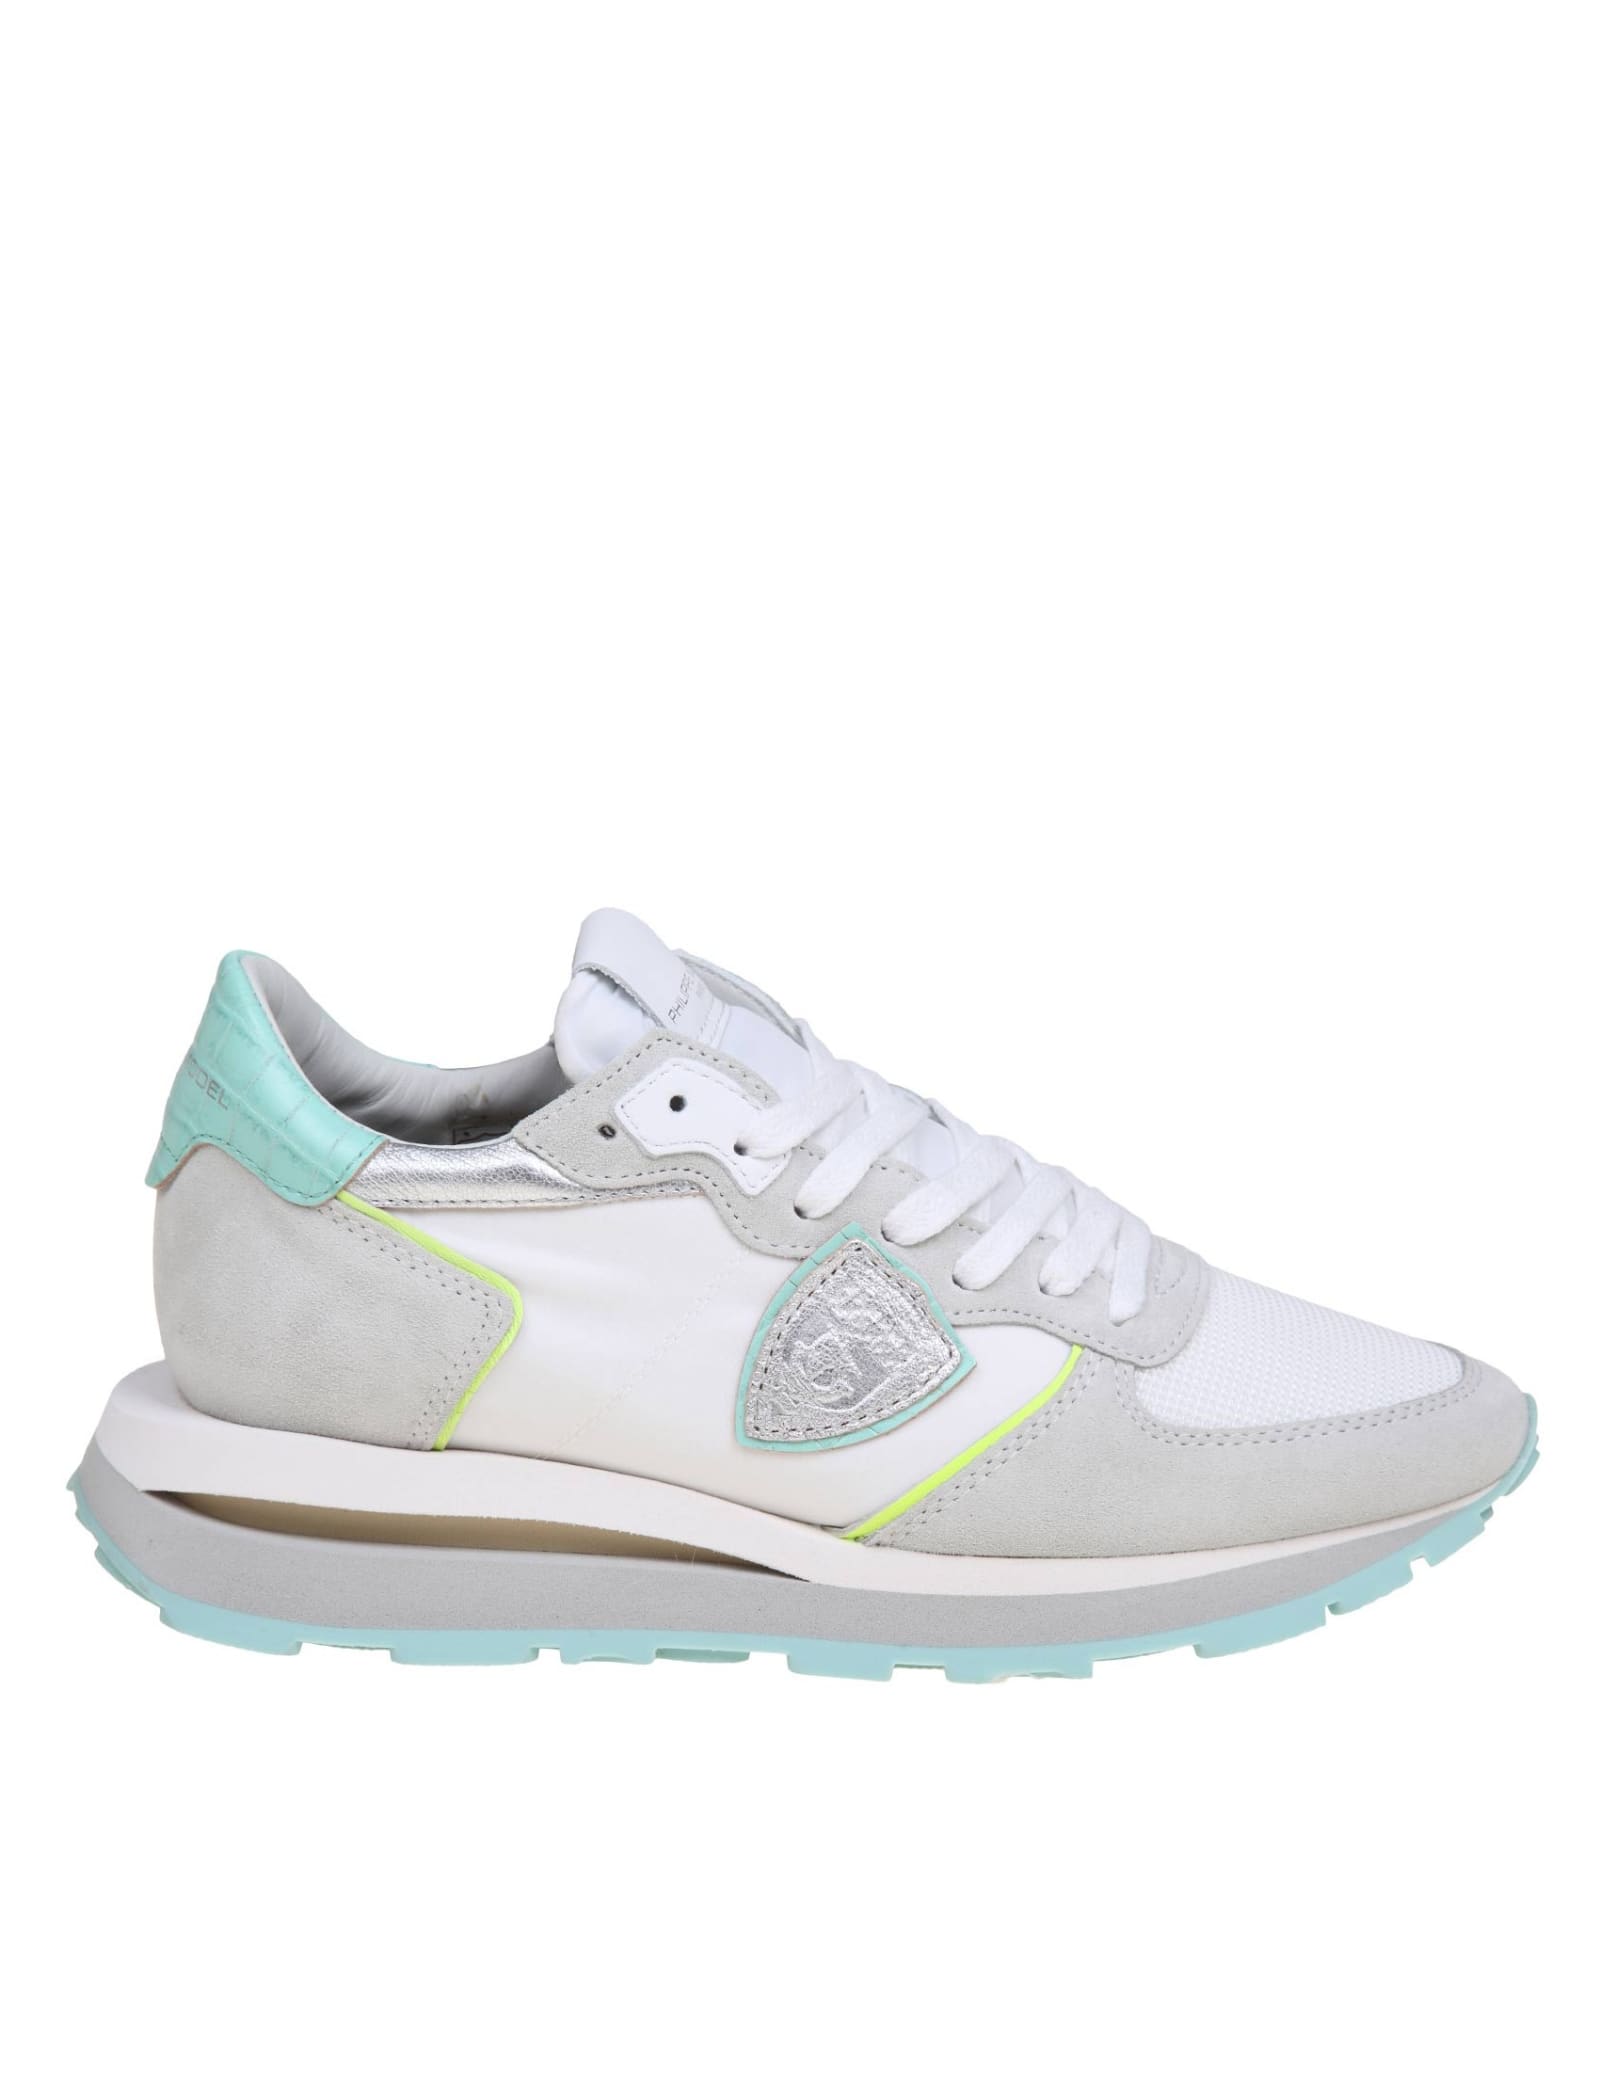 Philipp Plein Philippe Model Tropez Trainers In Suede And Nylon Colour White And Turquoise